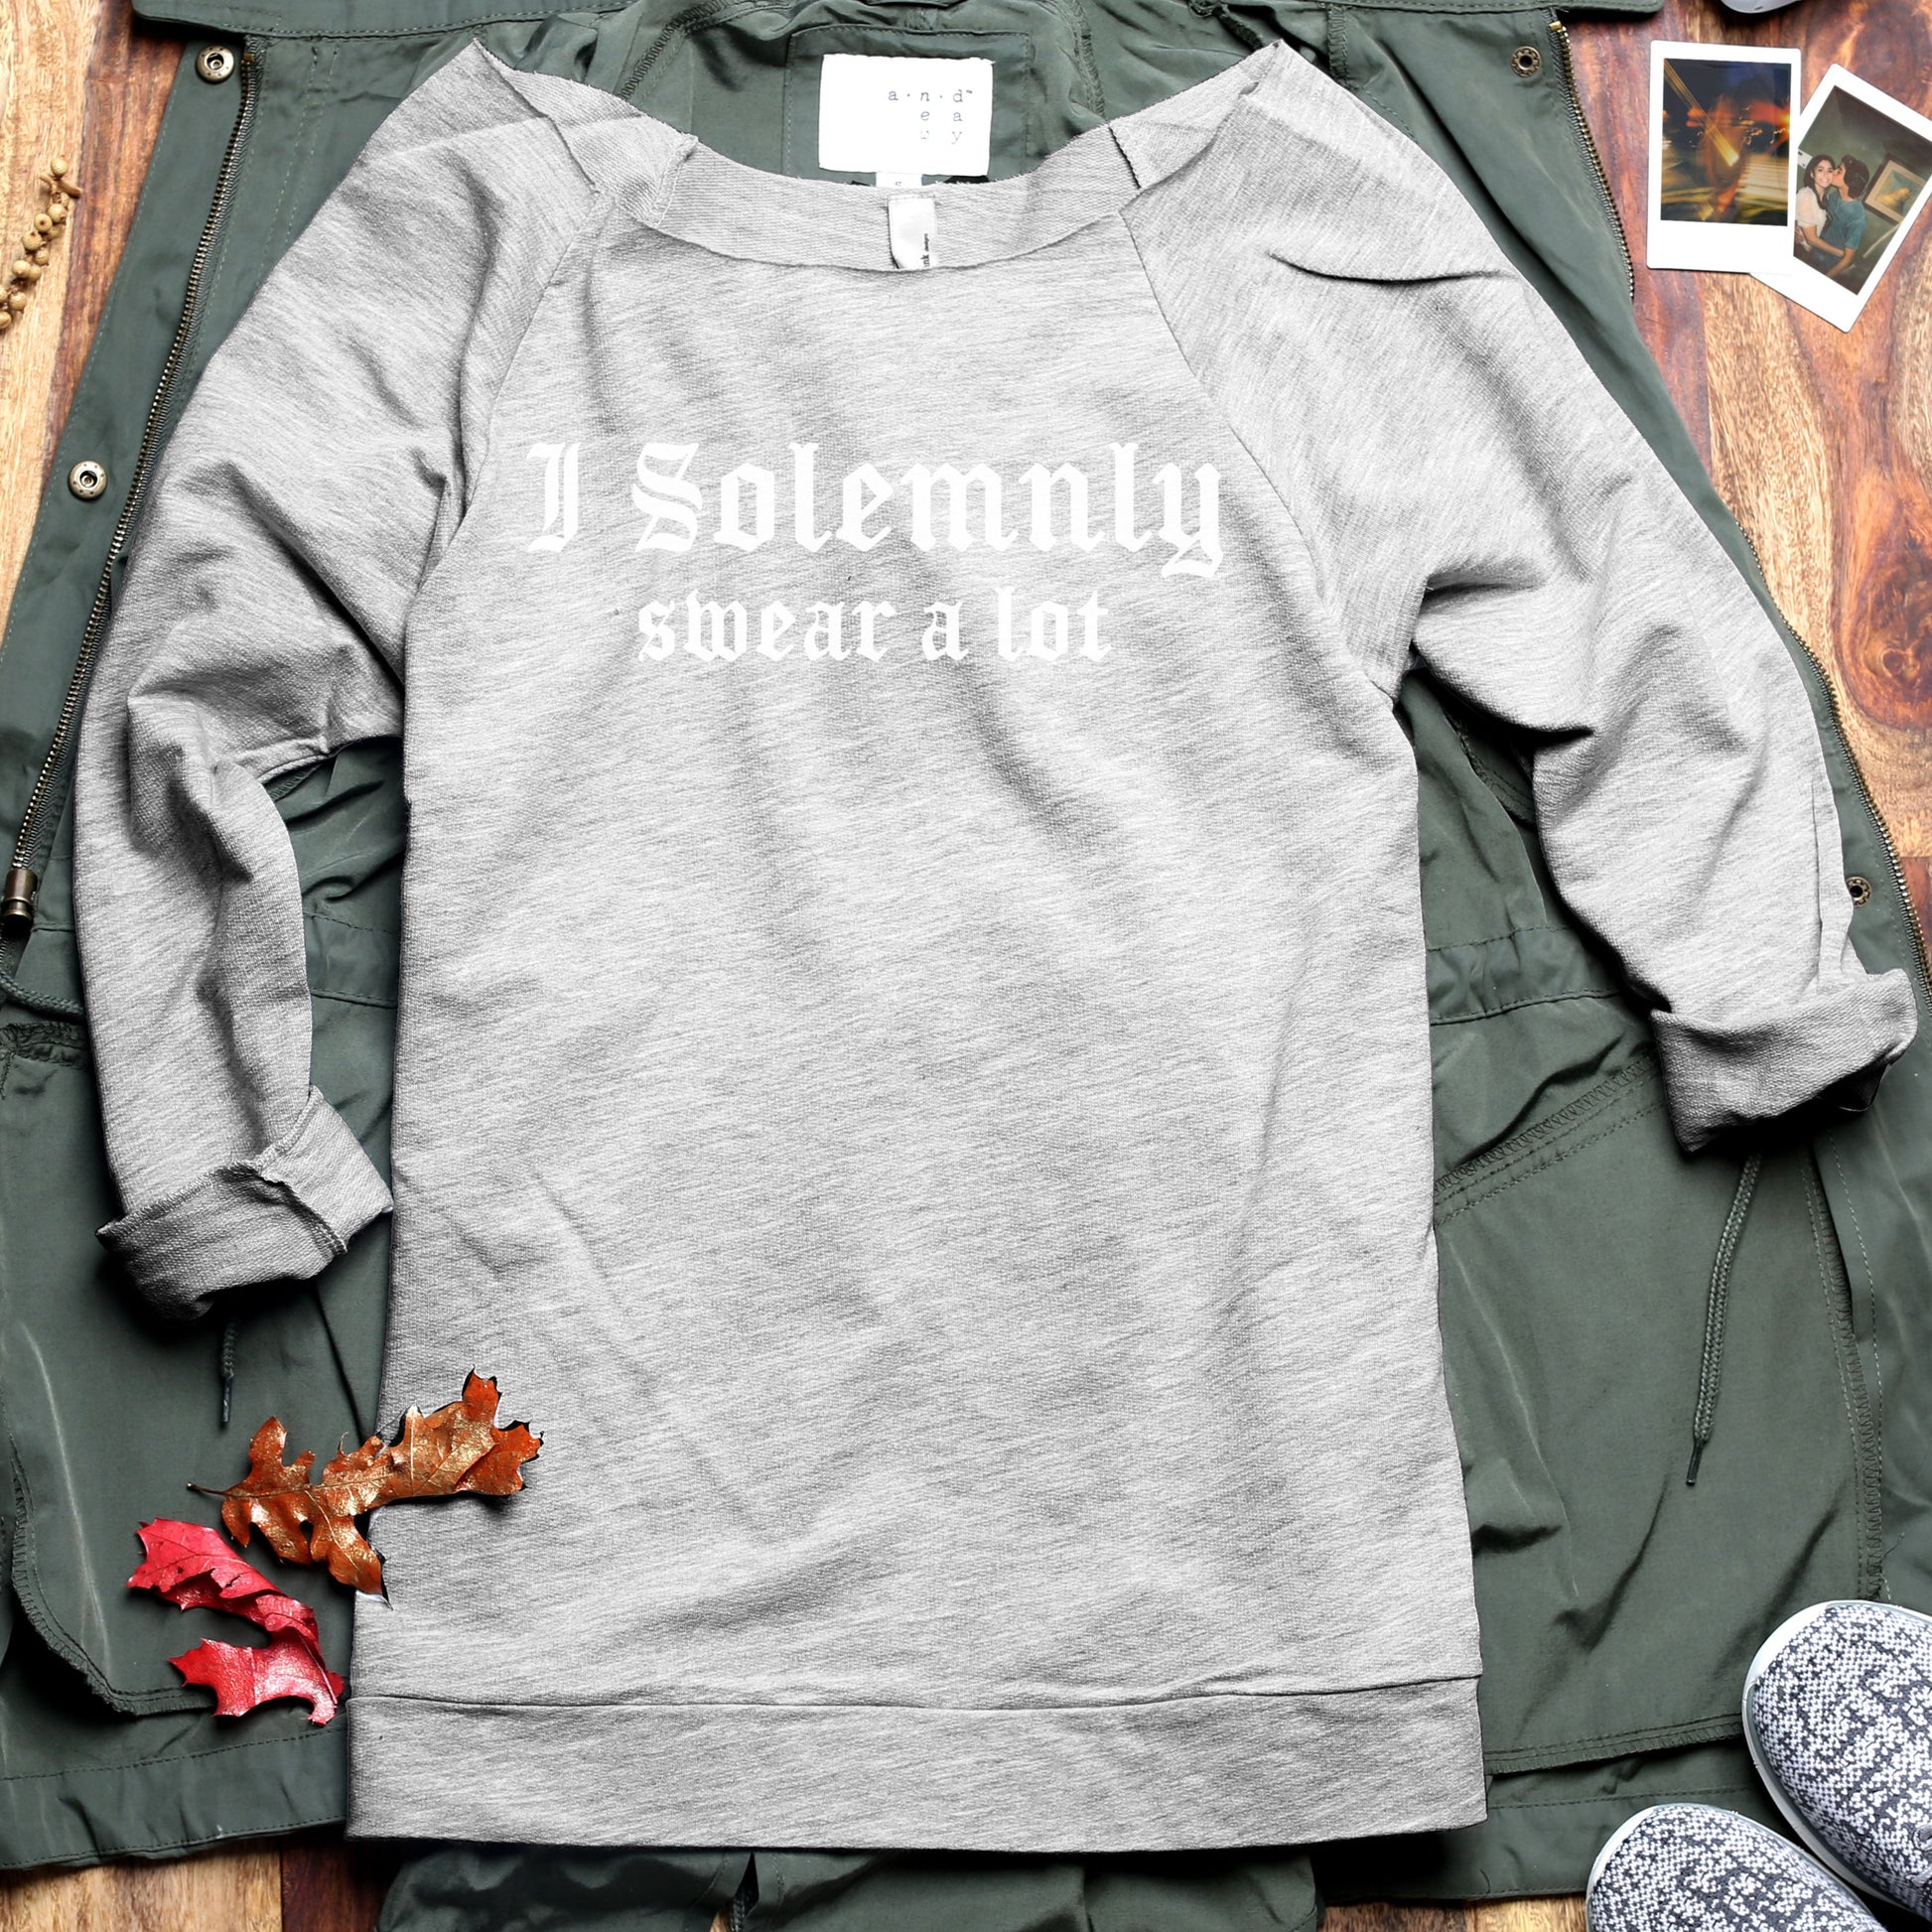 I Solemnly Swear A Lot - Stories You Can Wear